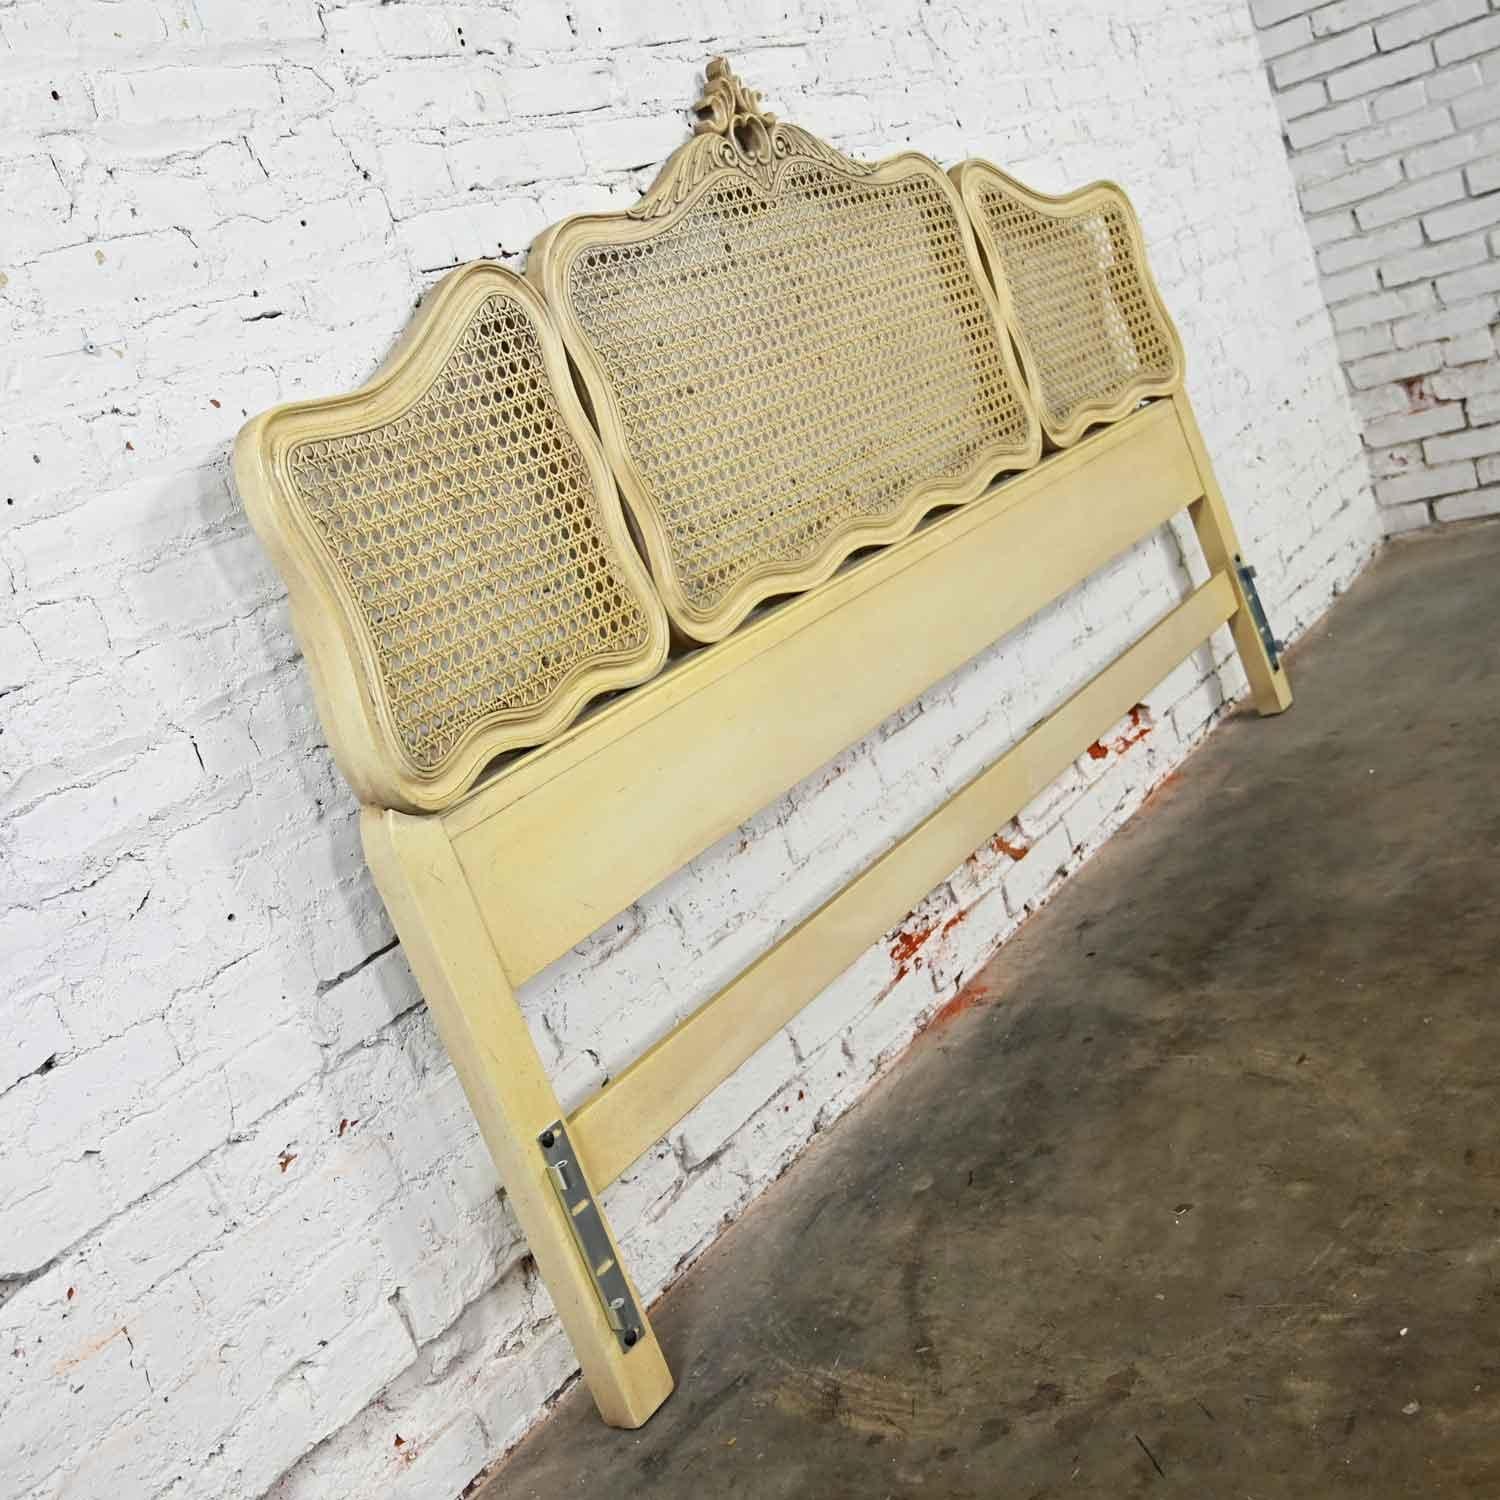 Outstanding French Provincial and Hollywood Regency style antiqued or cerused white & cane King Headboard by the Prince Howard Furniture Company. Beautiful condition, keeping in mind that this is vintage and not new so will have signs of use and